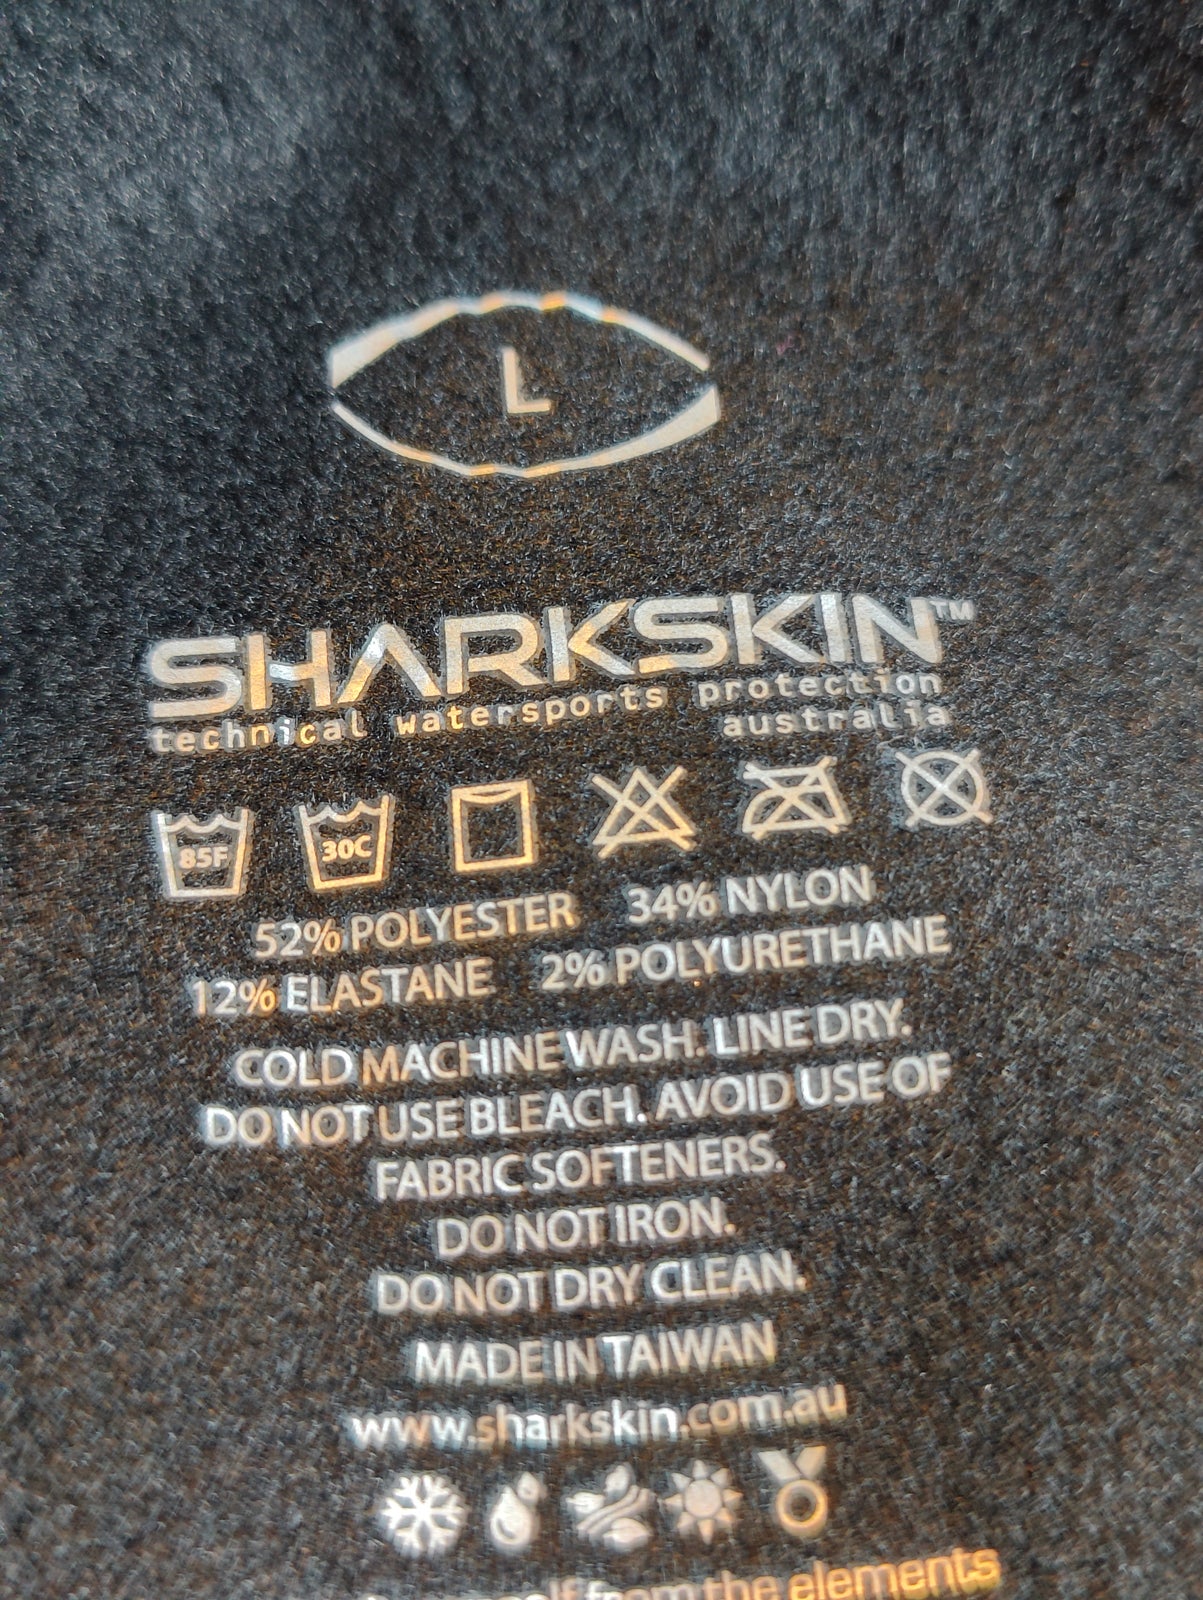 Technical Watersport Protection, SHARKSKIN Chillproof